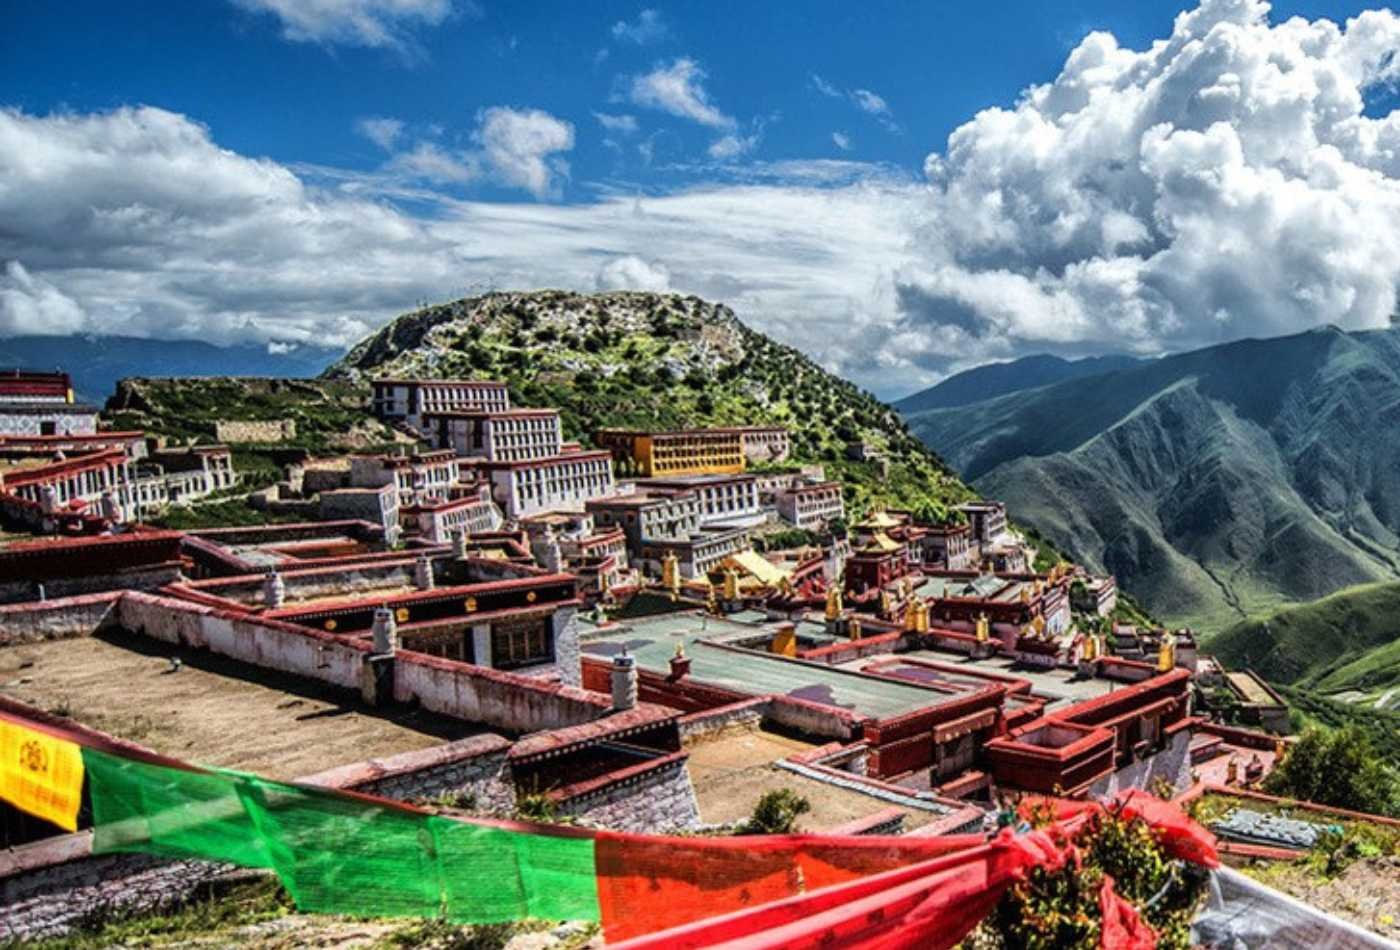 Ganden Monastery, with its red roof and surrounded by clouds in the sky, sits perched atop a hillside with a stunning view of the surrounding landscape.